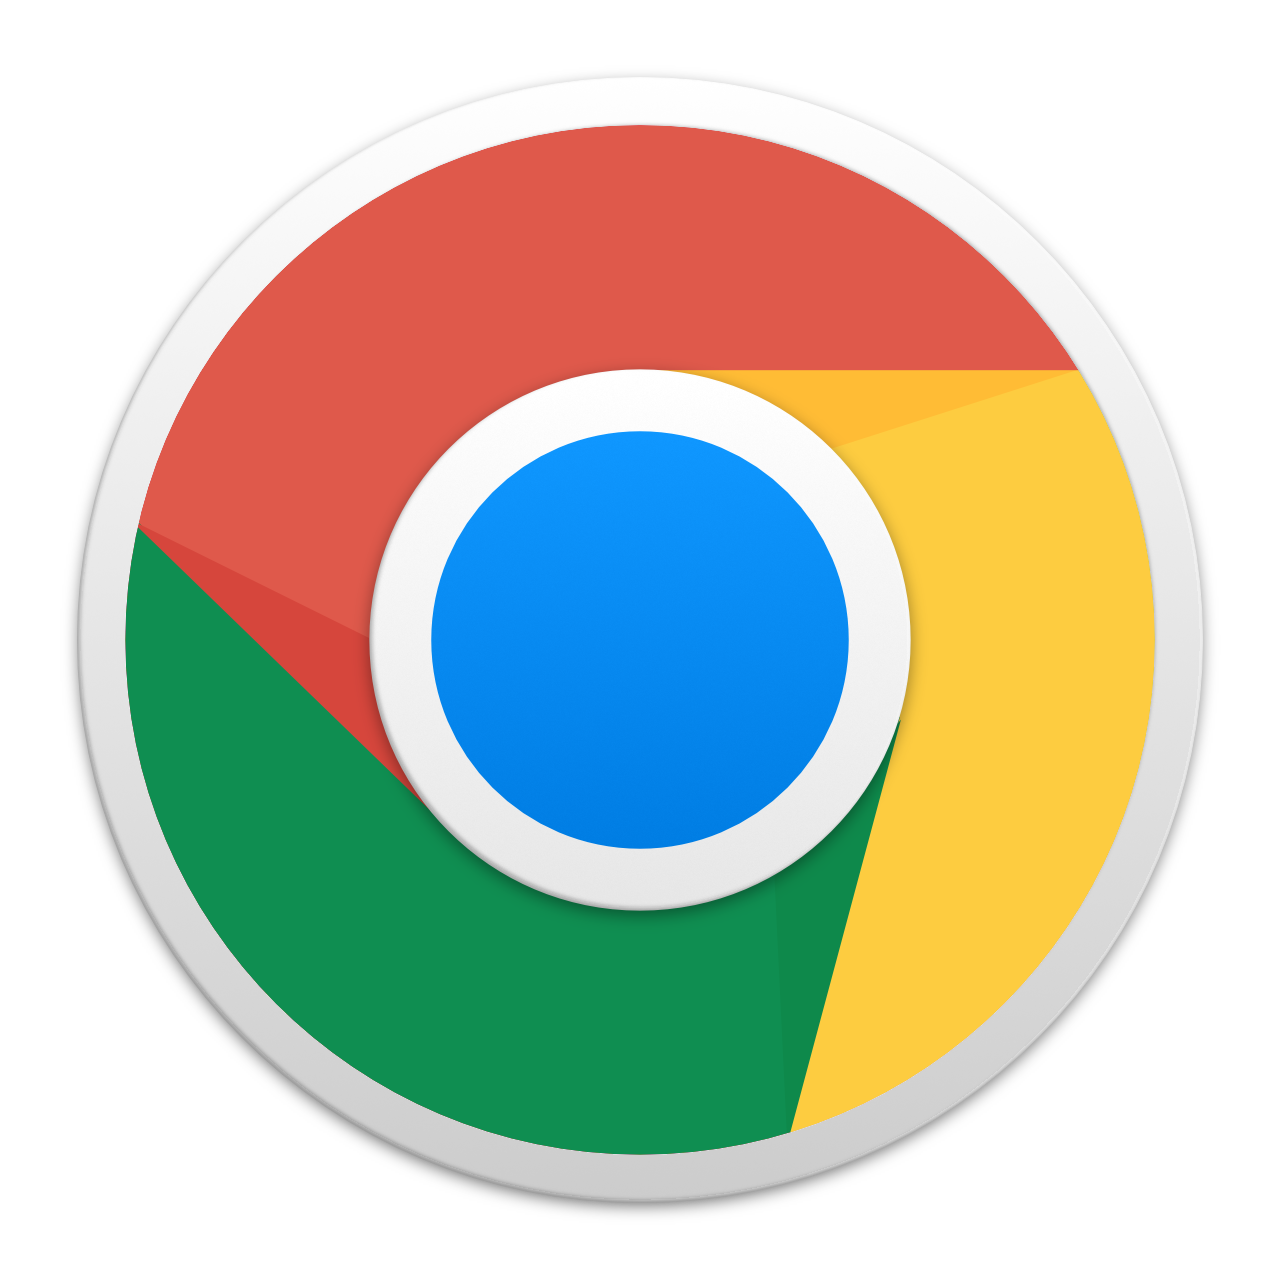 256x256 png images. Chrome logo free download